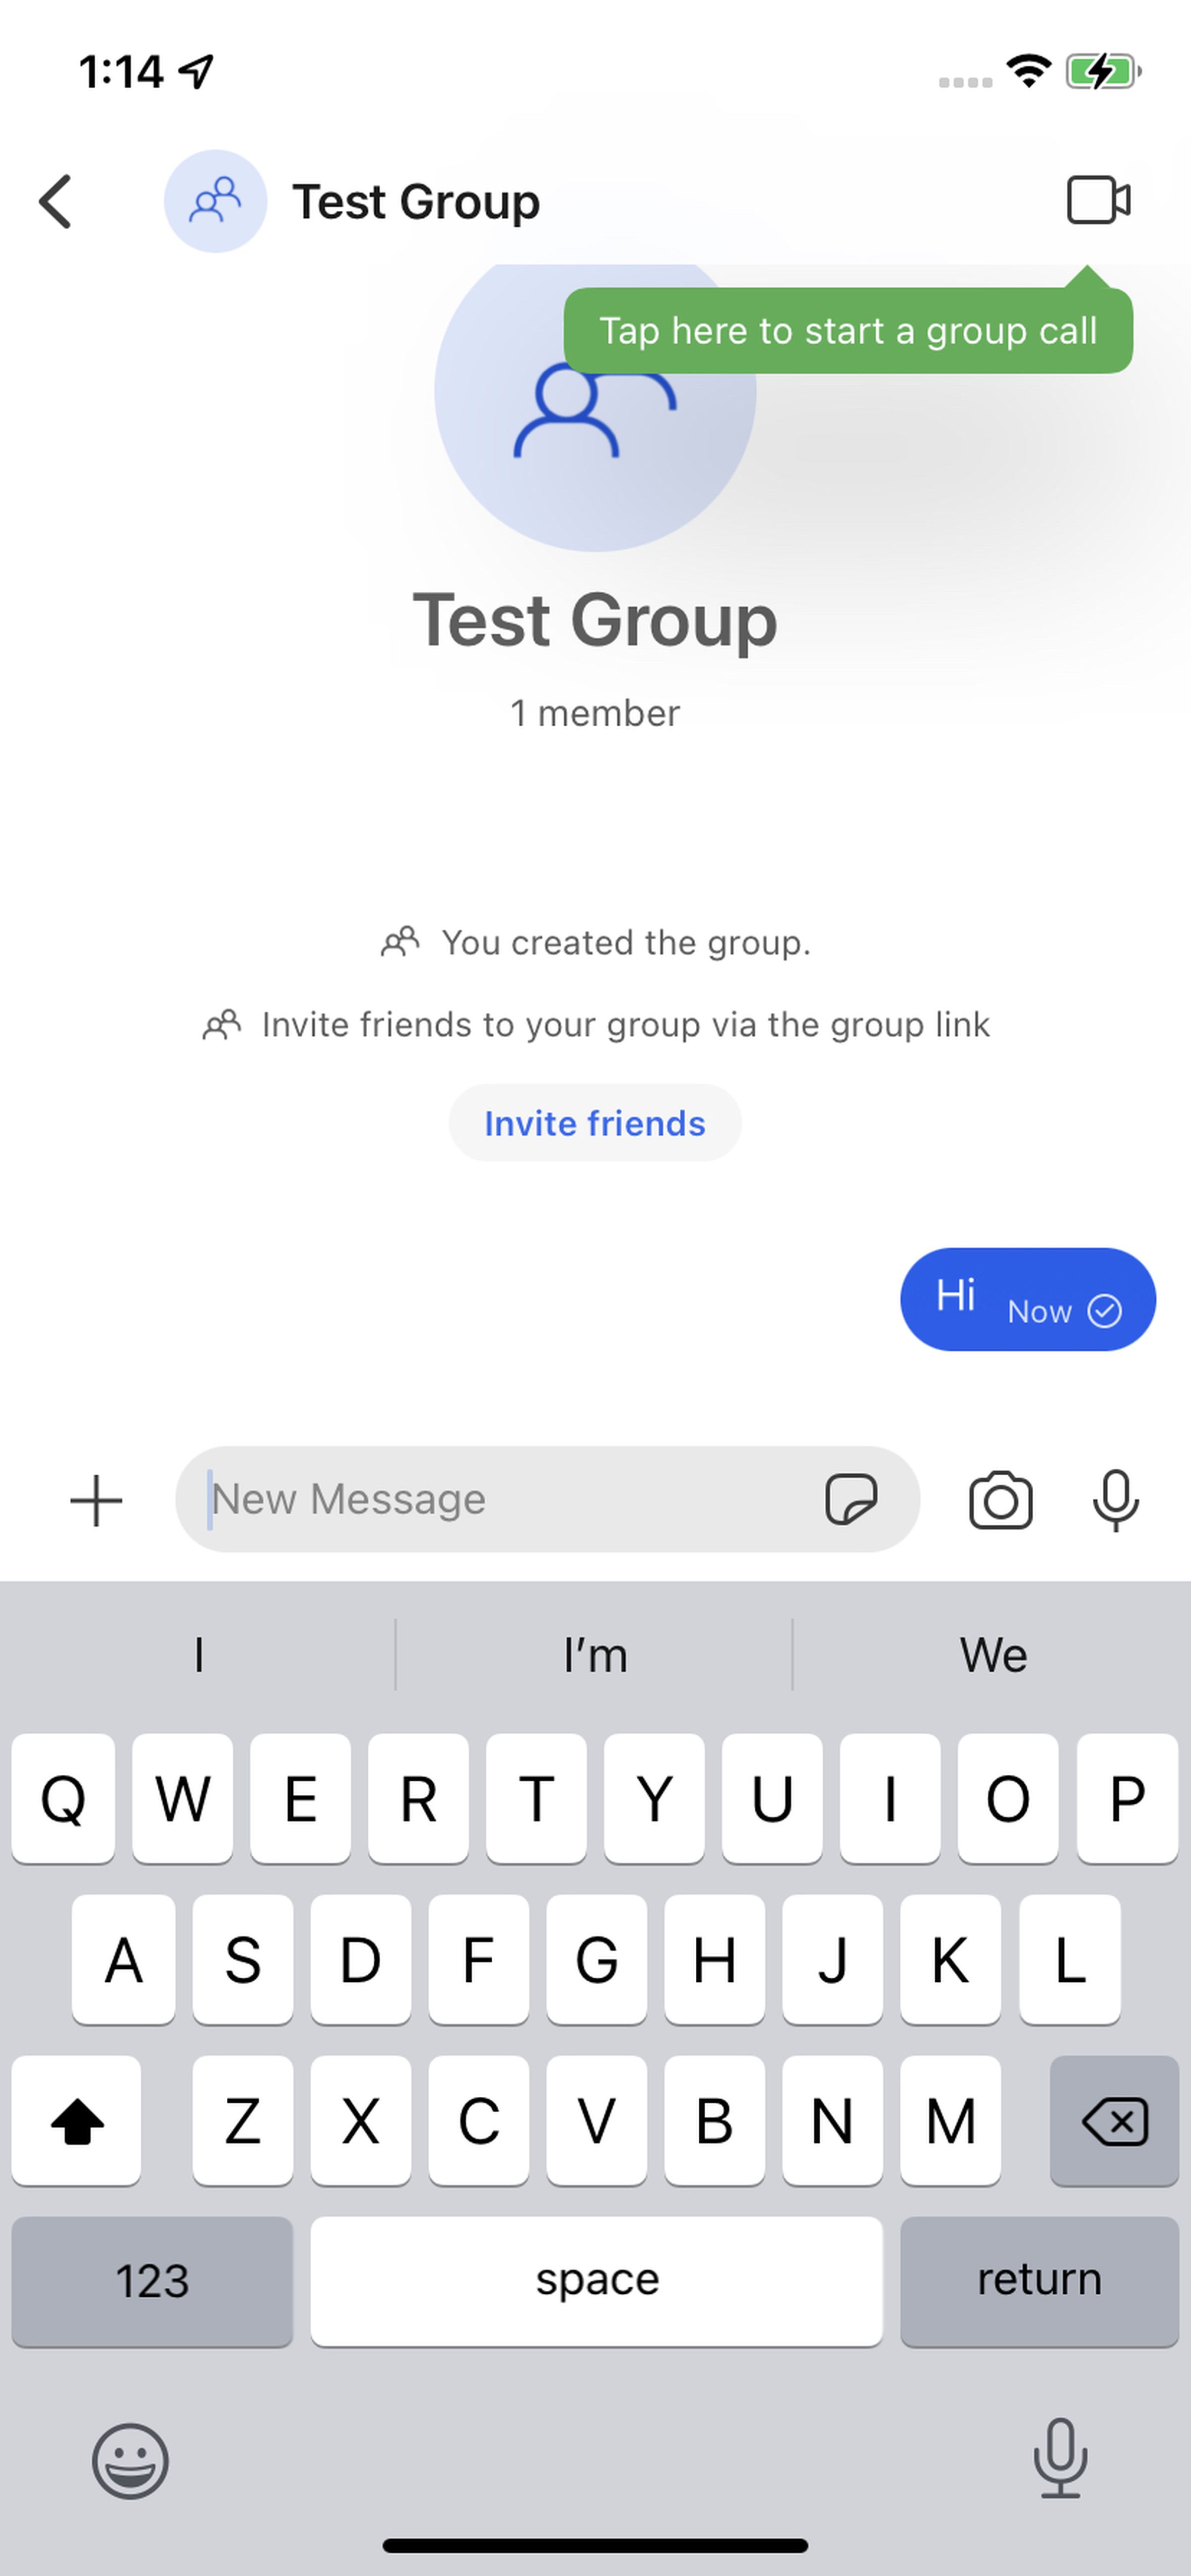 A group meeting starts as a text chat.